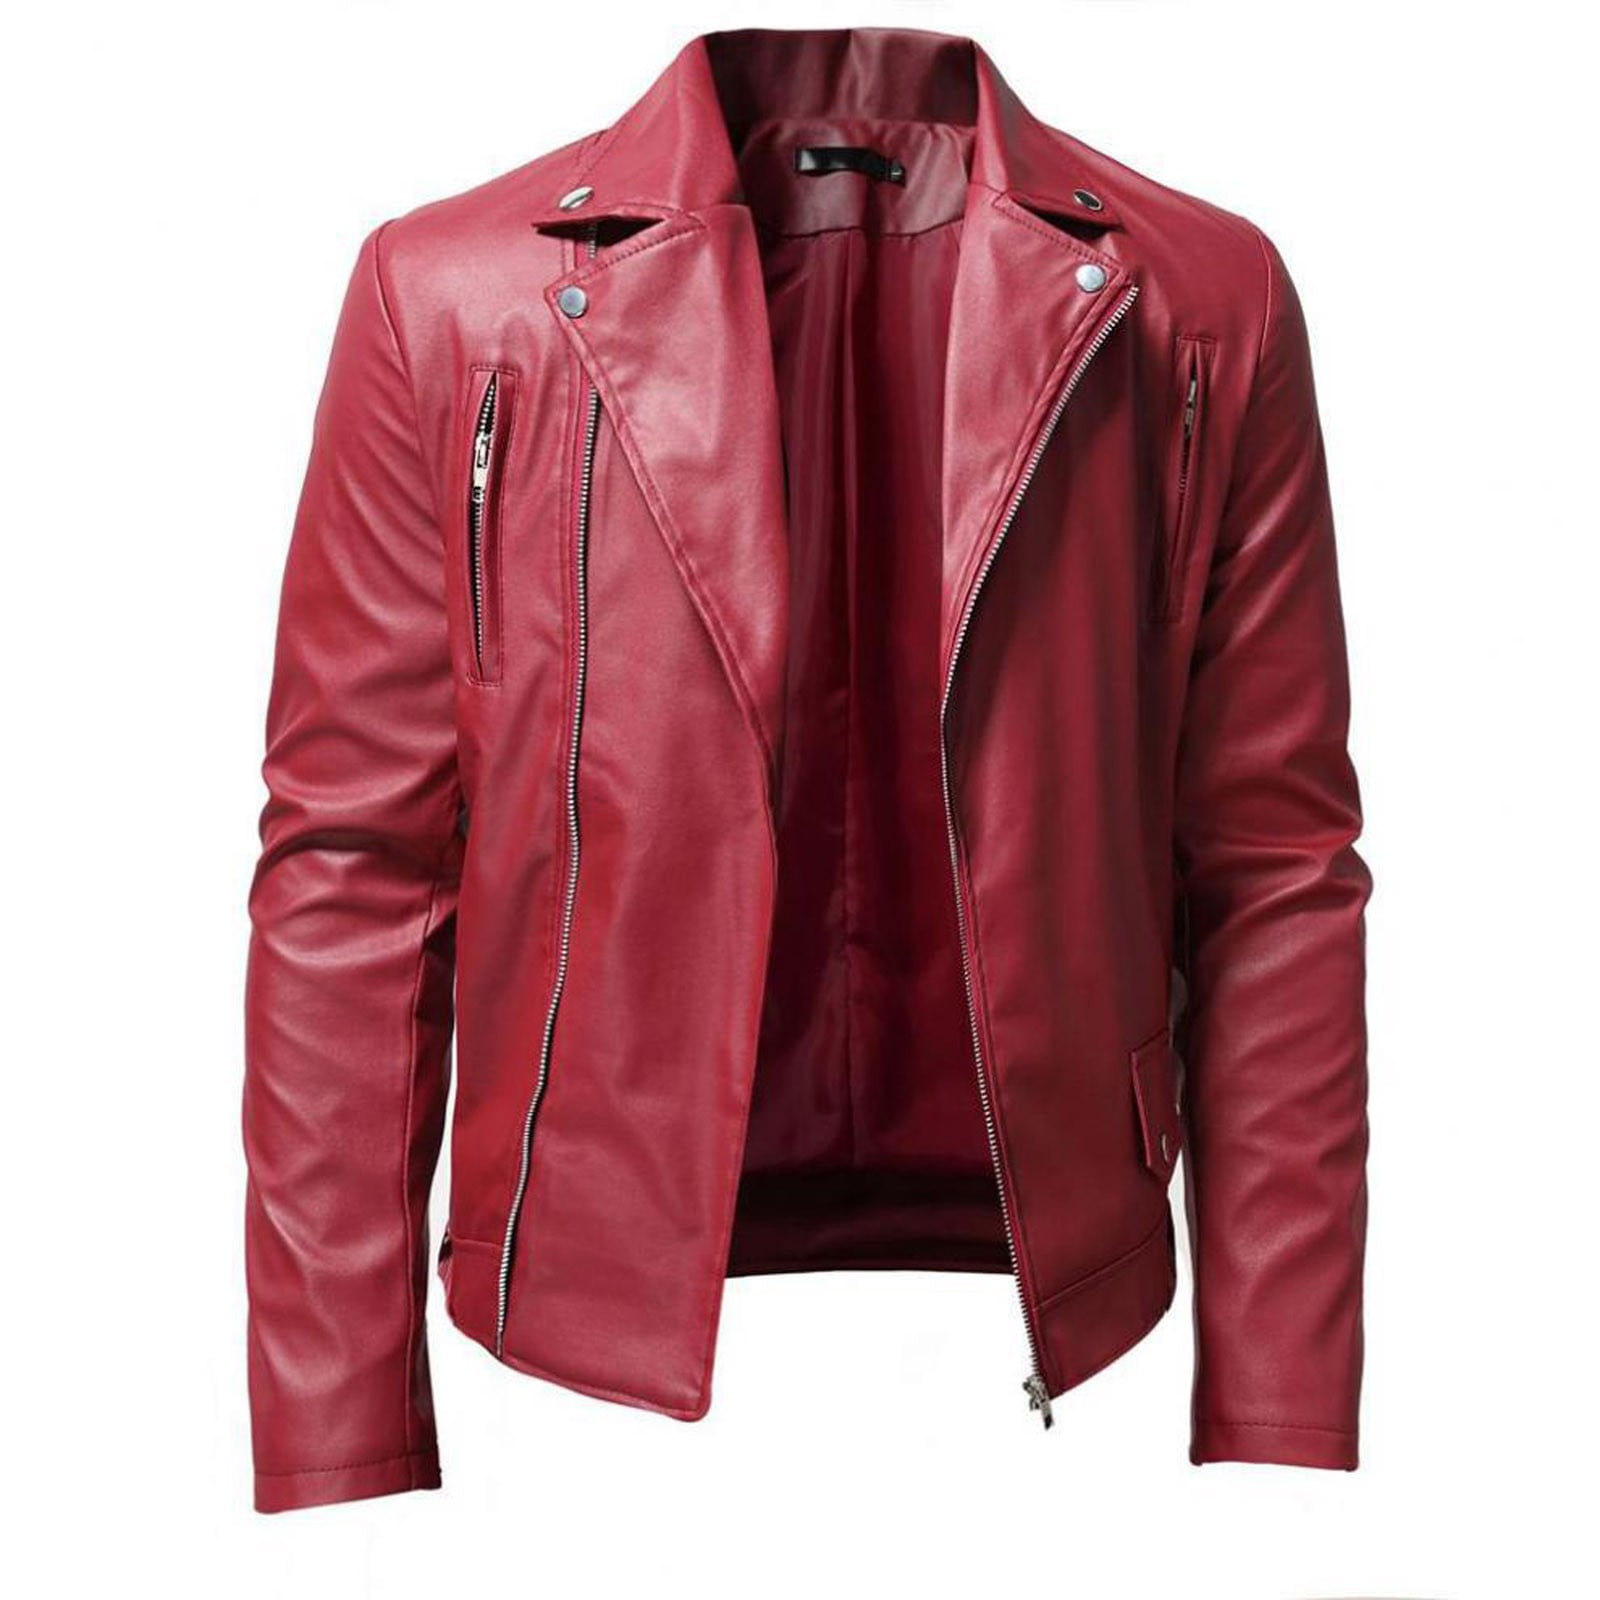 XFLWAM Men's PU Leather Jacket Causal Belted Faux Leather Motorcycle ...